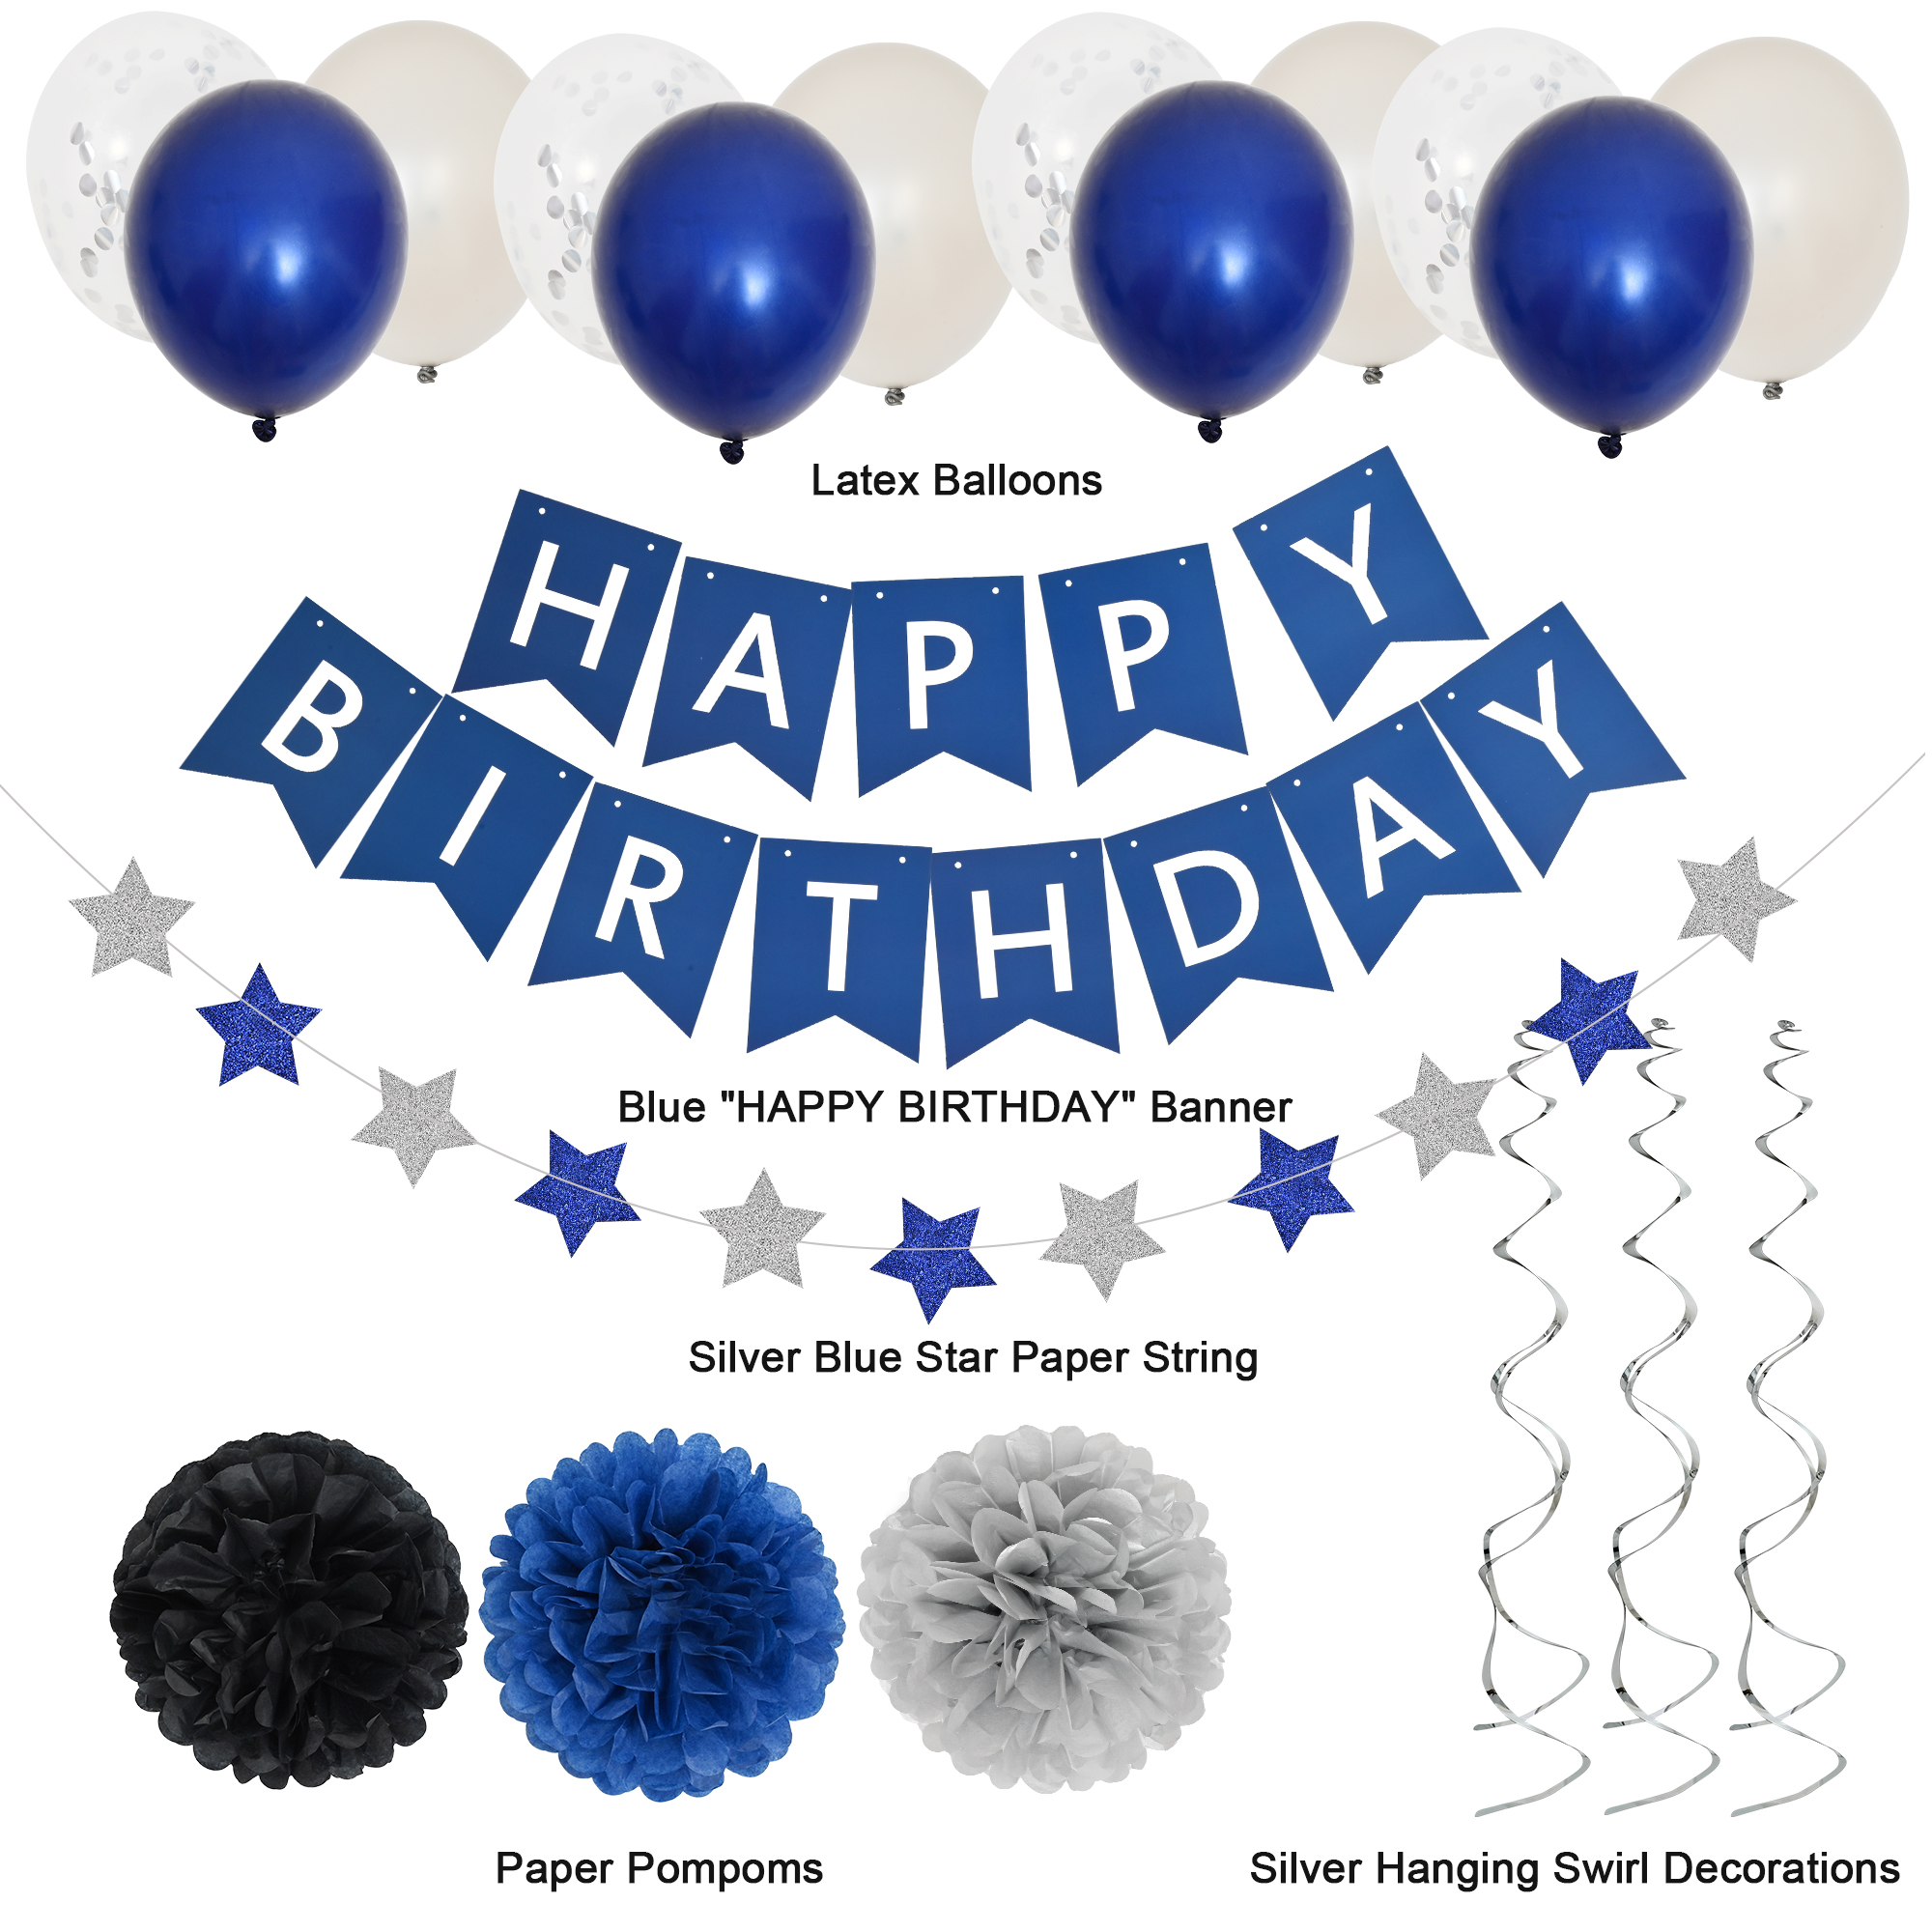 Birthday Party Decoration Silver Blue for Mans Boys, Balloons, Happy Birthday Banner, Fringe Curtain - image 4 of 7